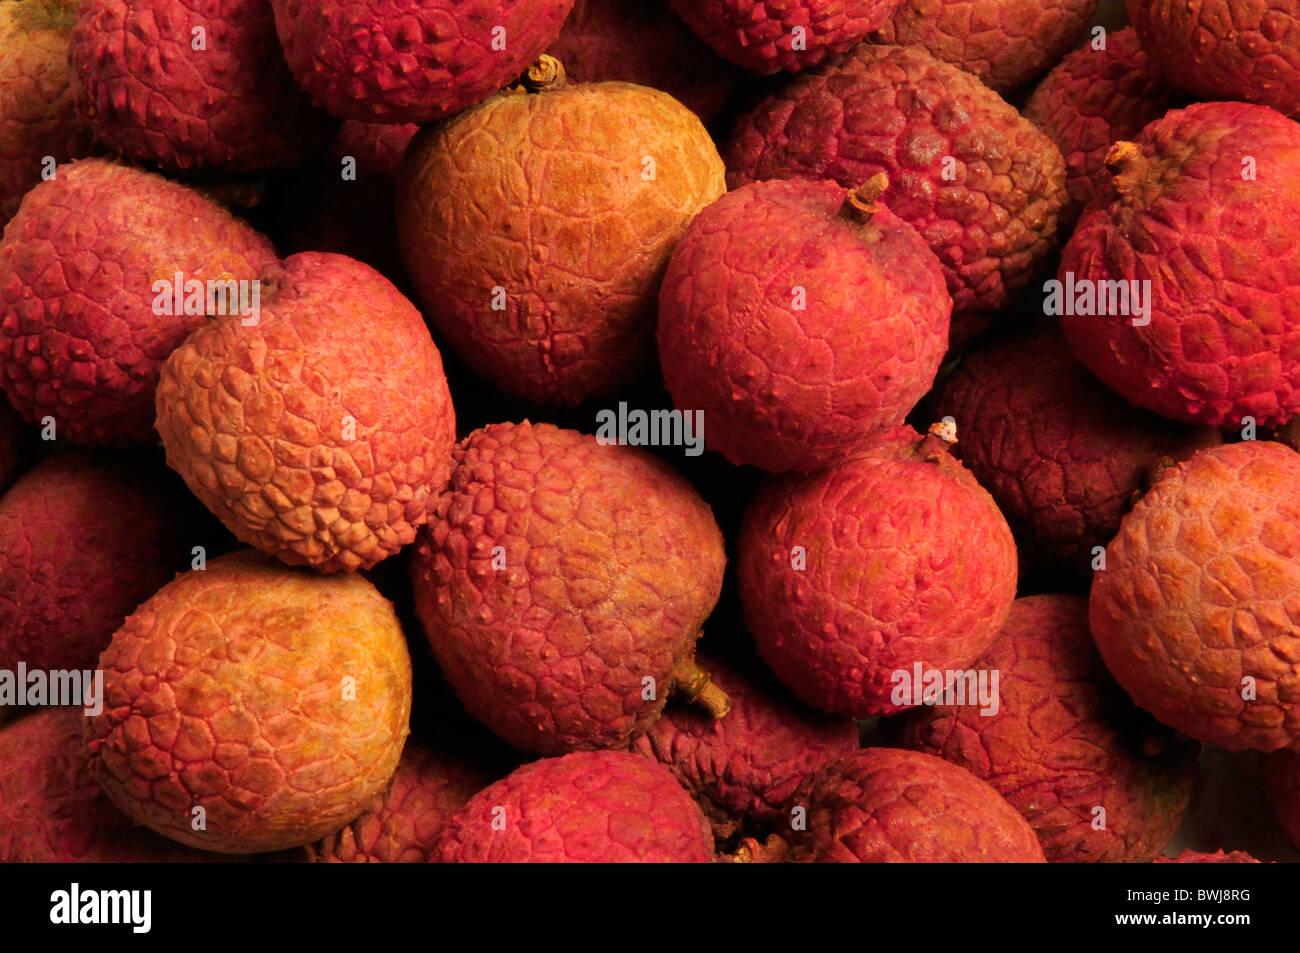 Red and orange Chinese lychee fruit Stock Photo